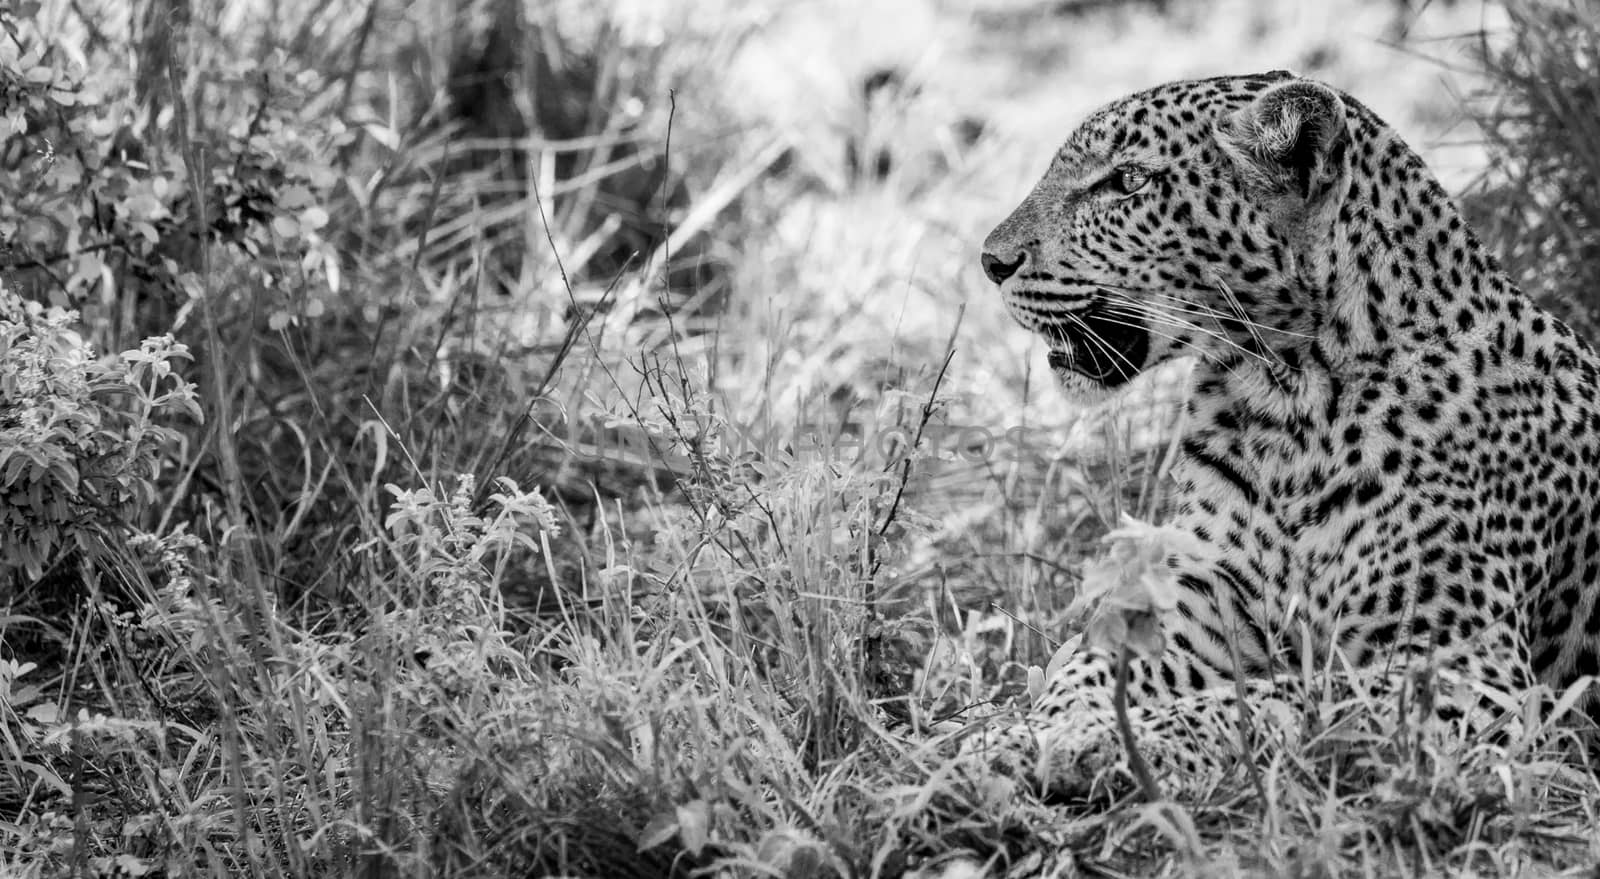 Laying Leopard laying in the grass in black and white in the Kruger National Park, South Africa.